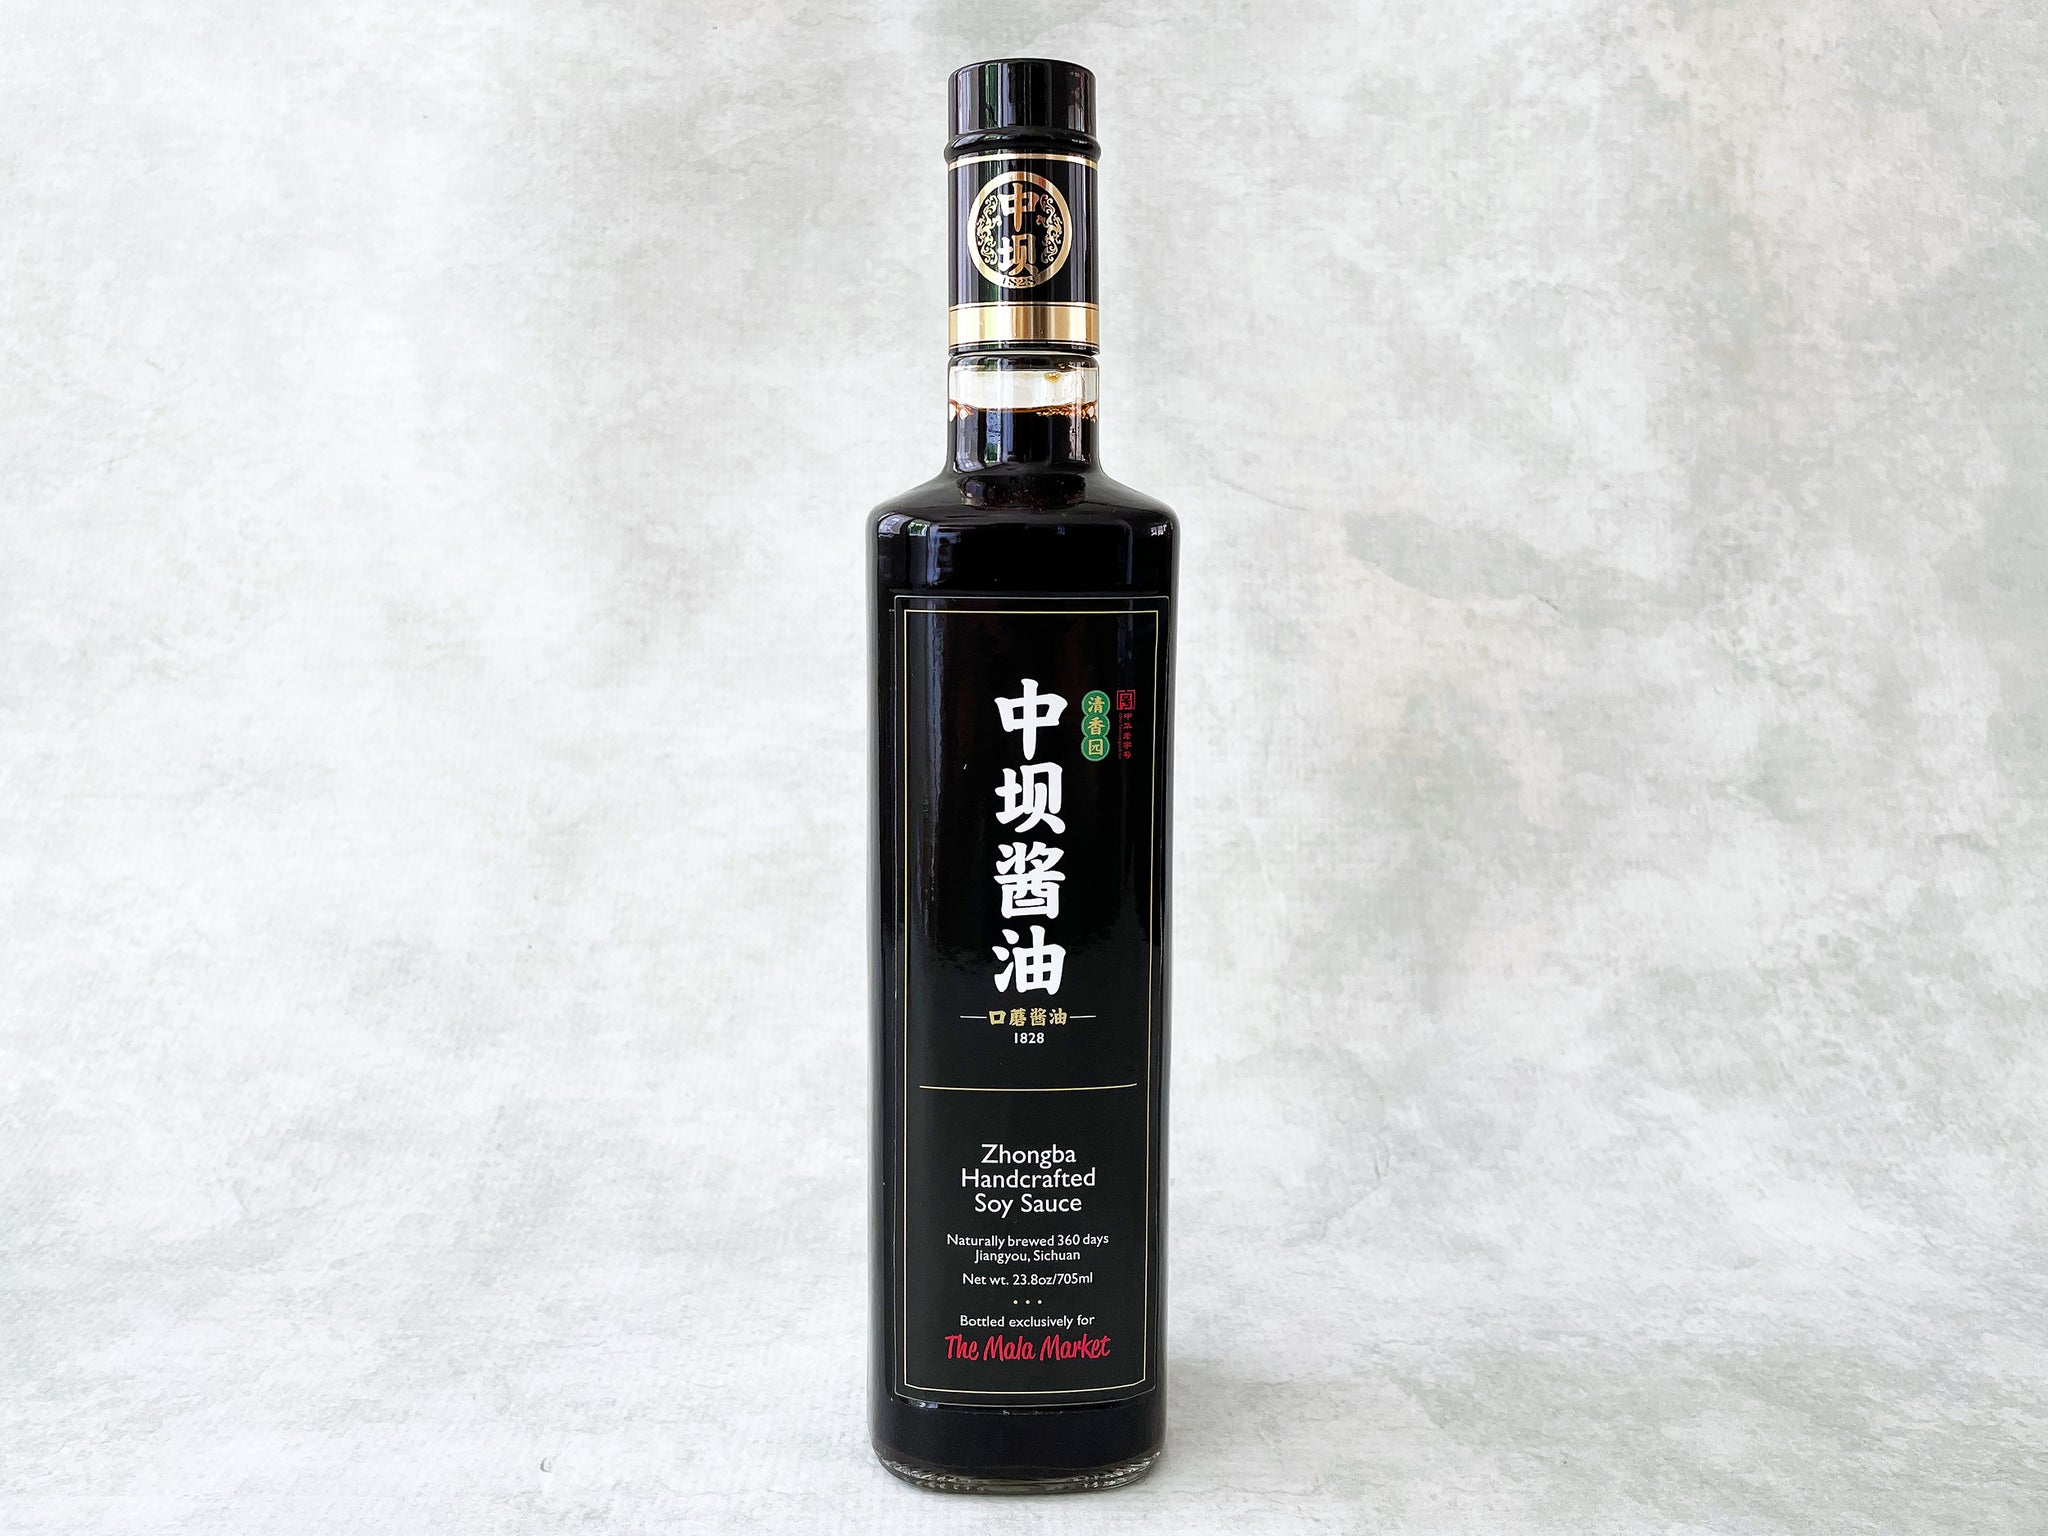 Zhongba Handcrafted Soy Sauce 